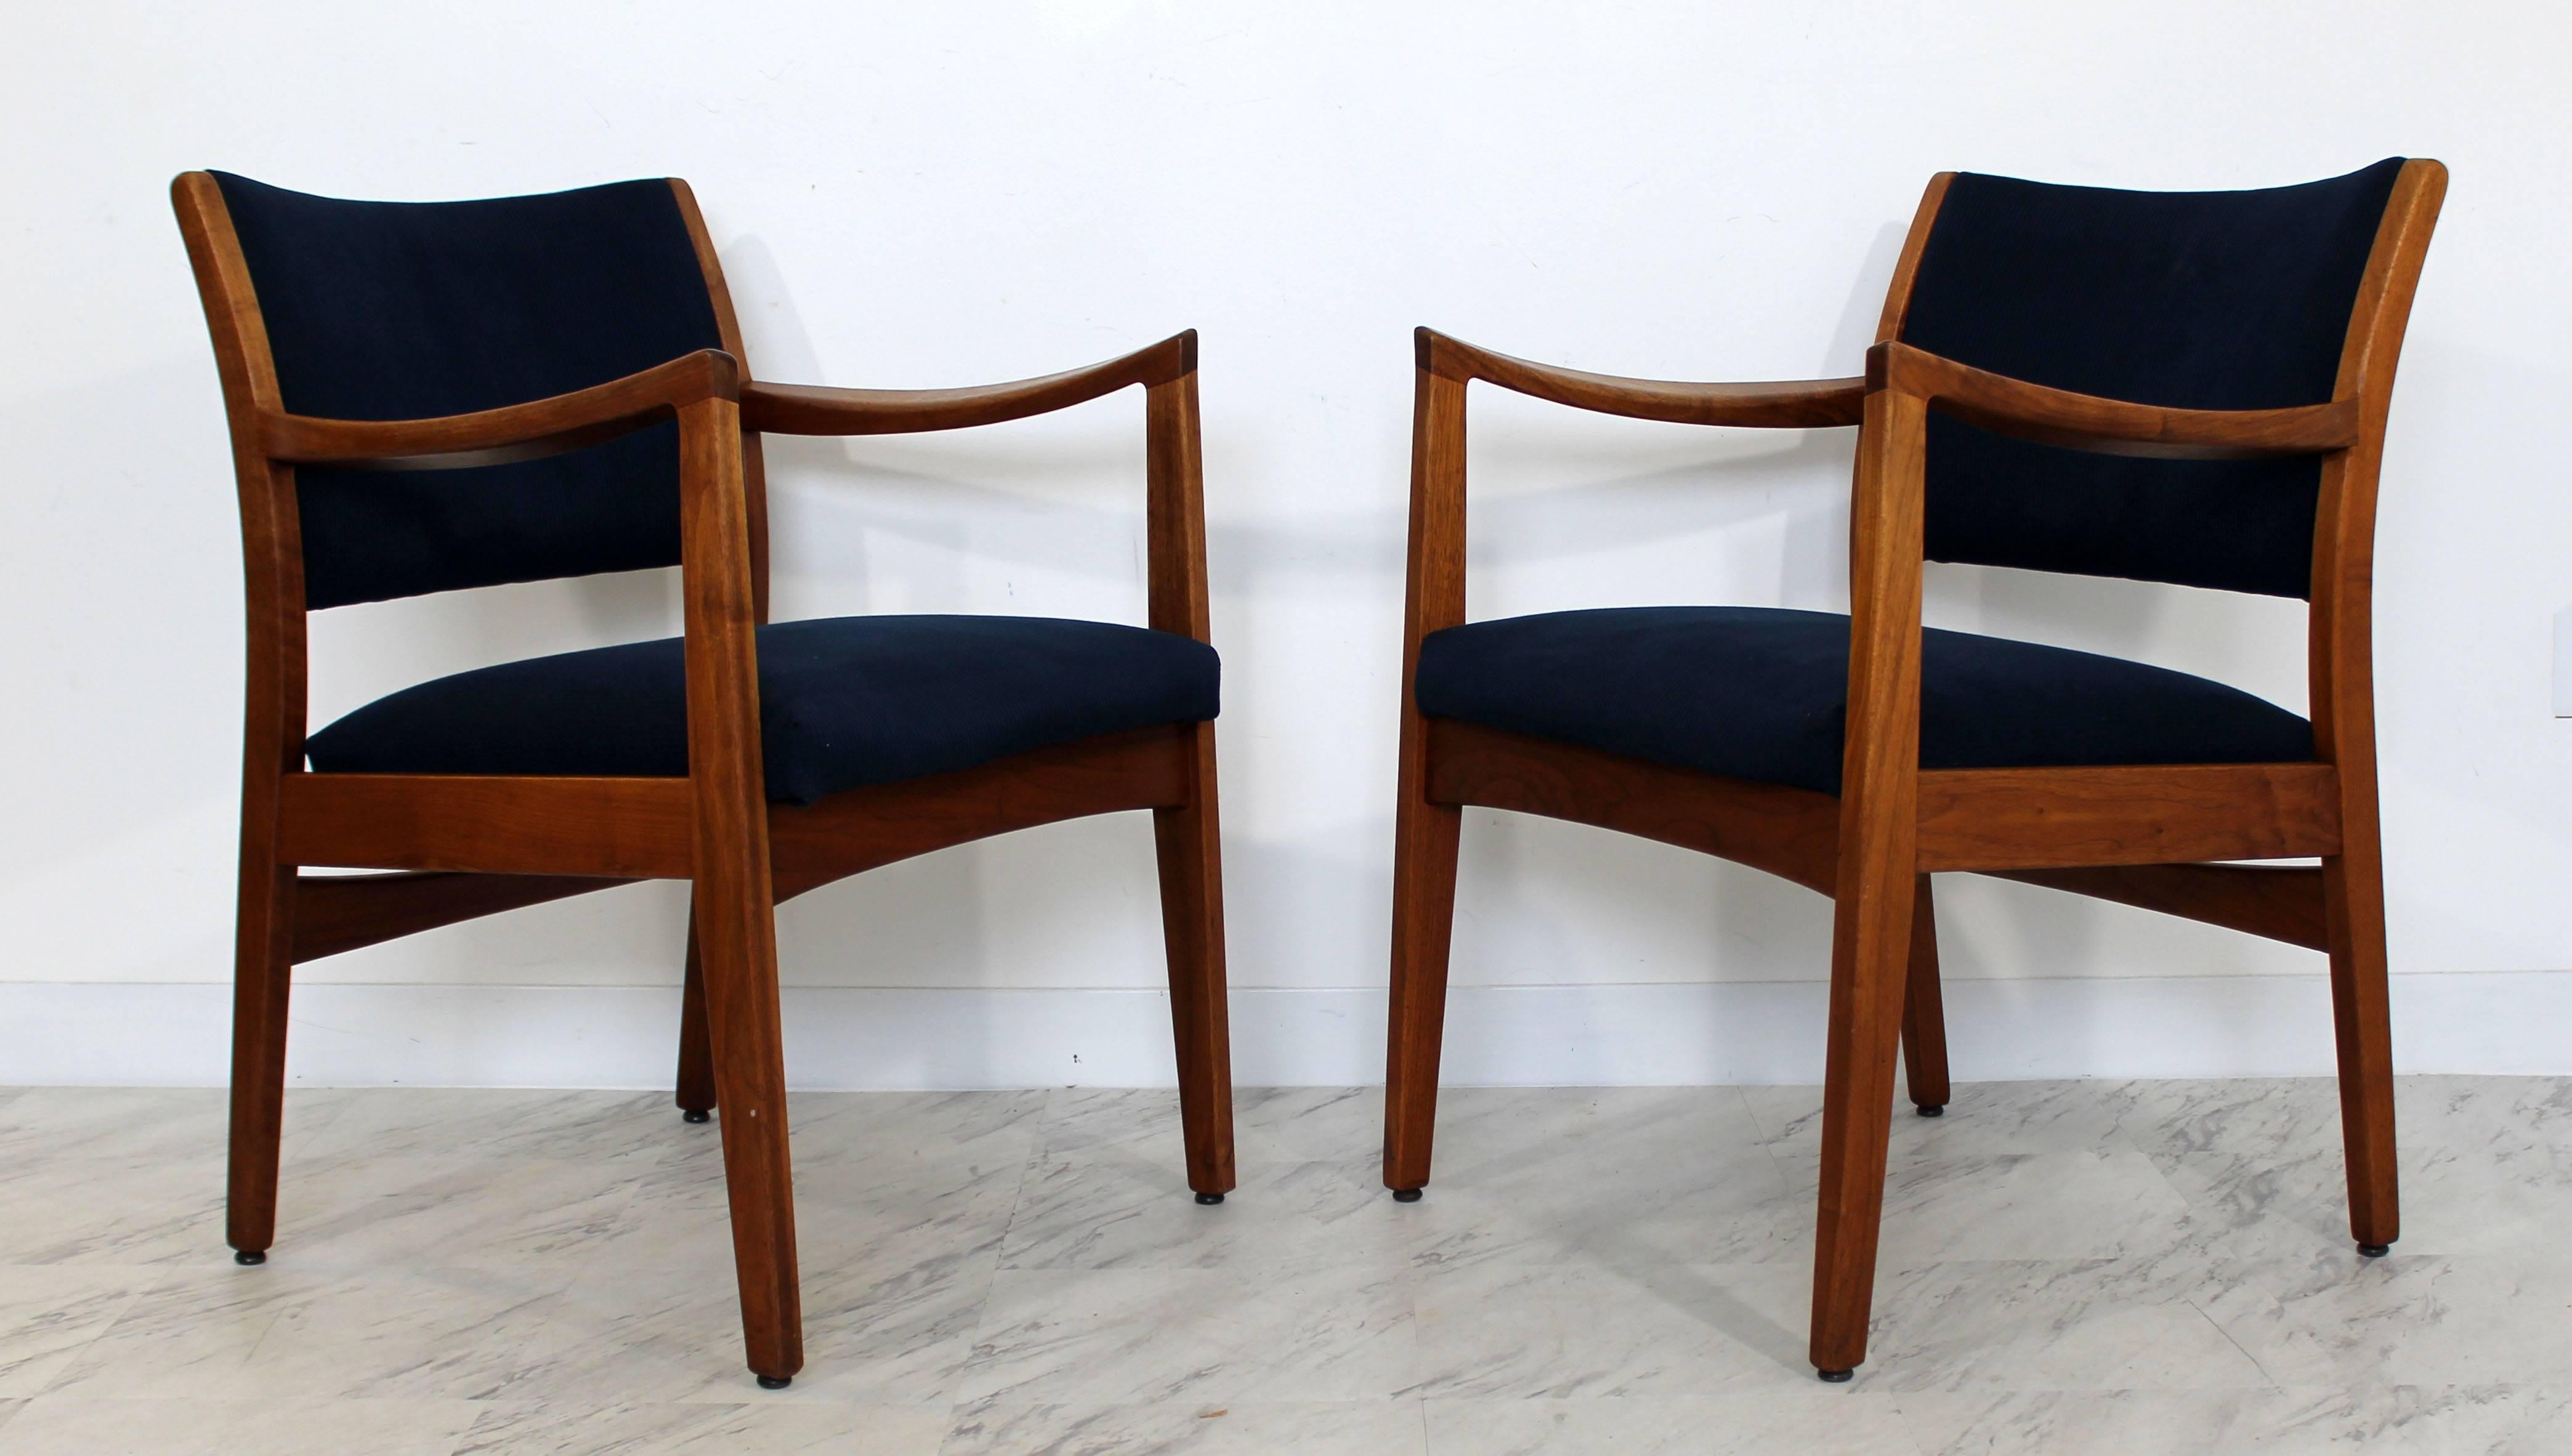 American Mid-Century Modern Pair of Walnut Armchairs by Johnson 1960s in Jens Risom Style